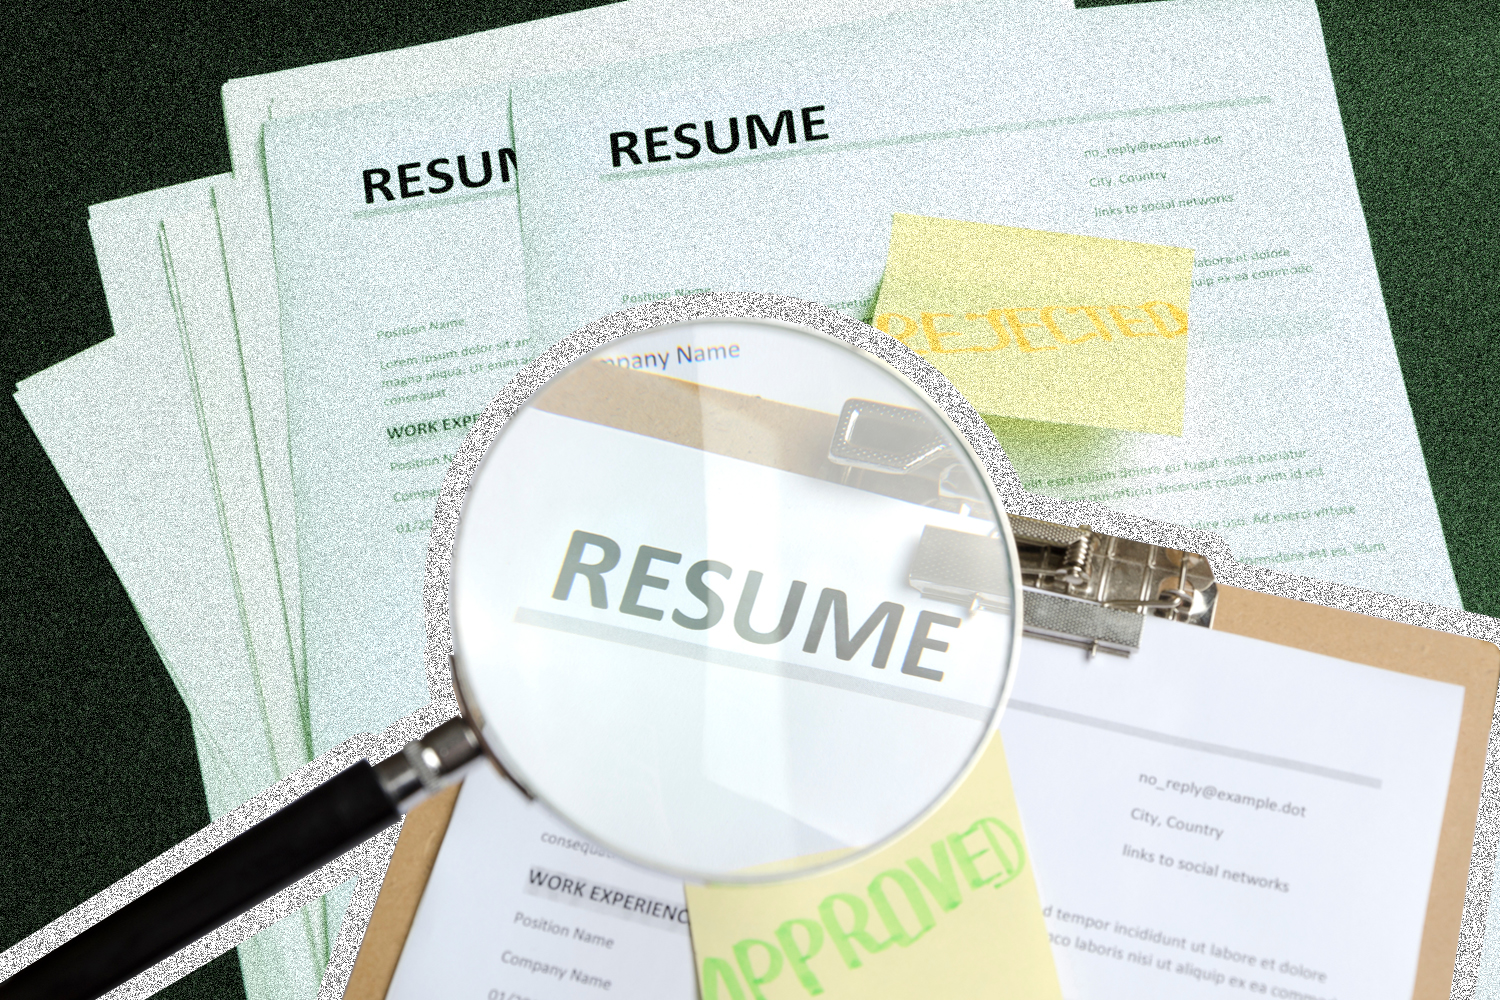 magnifying glass identifying an accepted resume on a stack of rejects